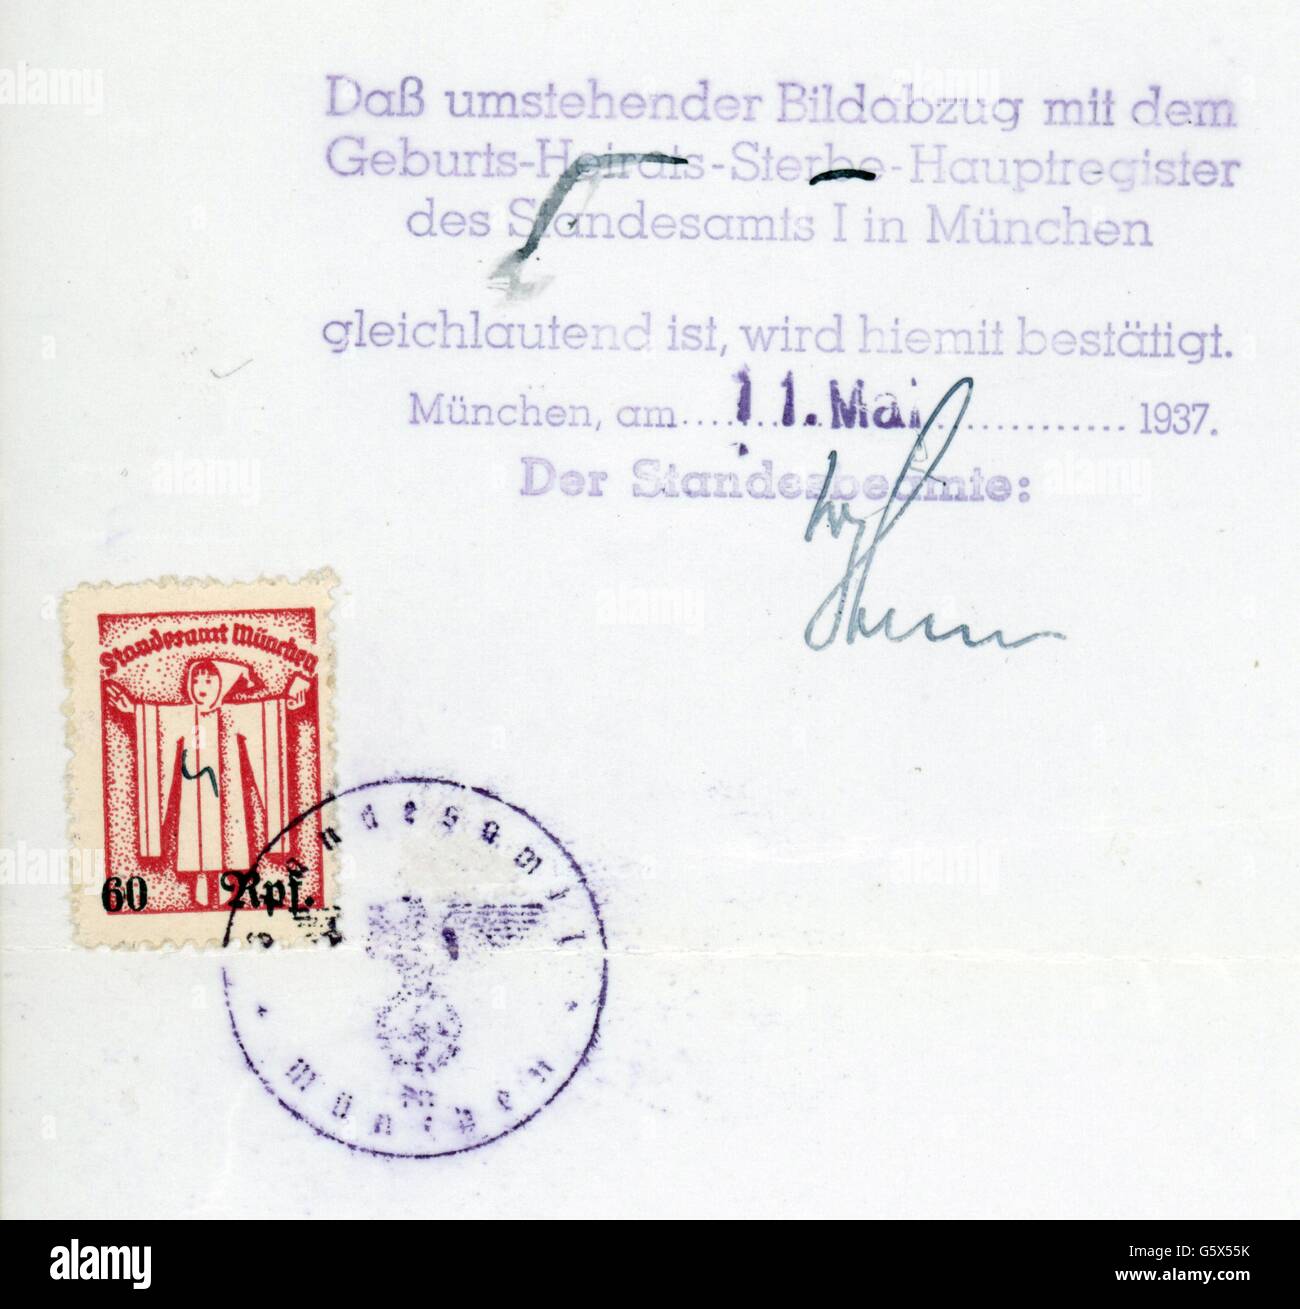 Need help with receipt from Munich, Germany